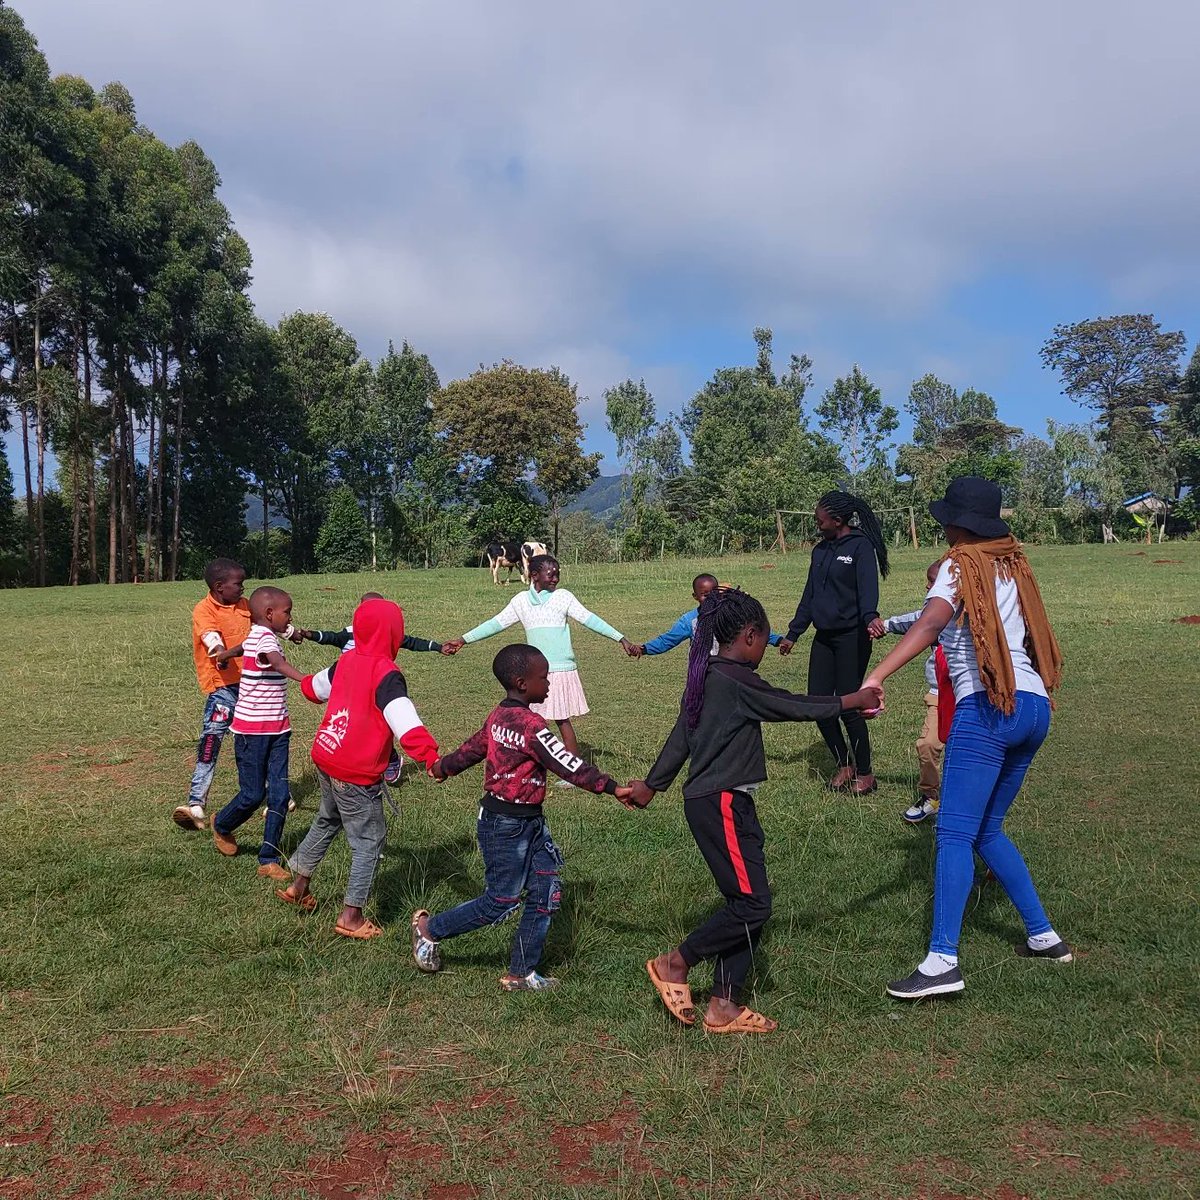 After experiencing load shedding we opted to do outdoor activities. The kids enjoyed it.
#kidsintechnology 
#kidscodingclasses 
#kidscodingweek 
#kidscoding